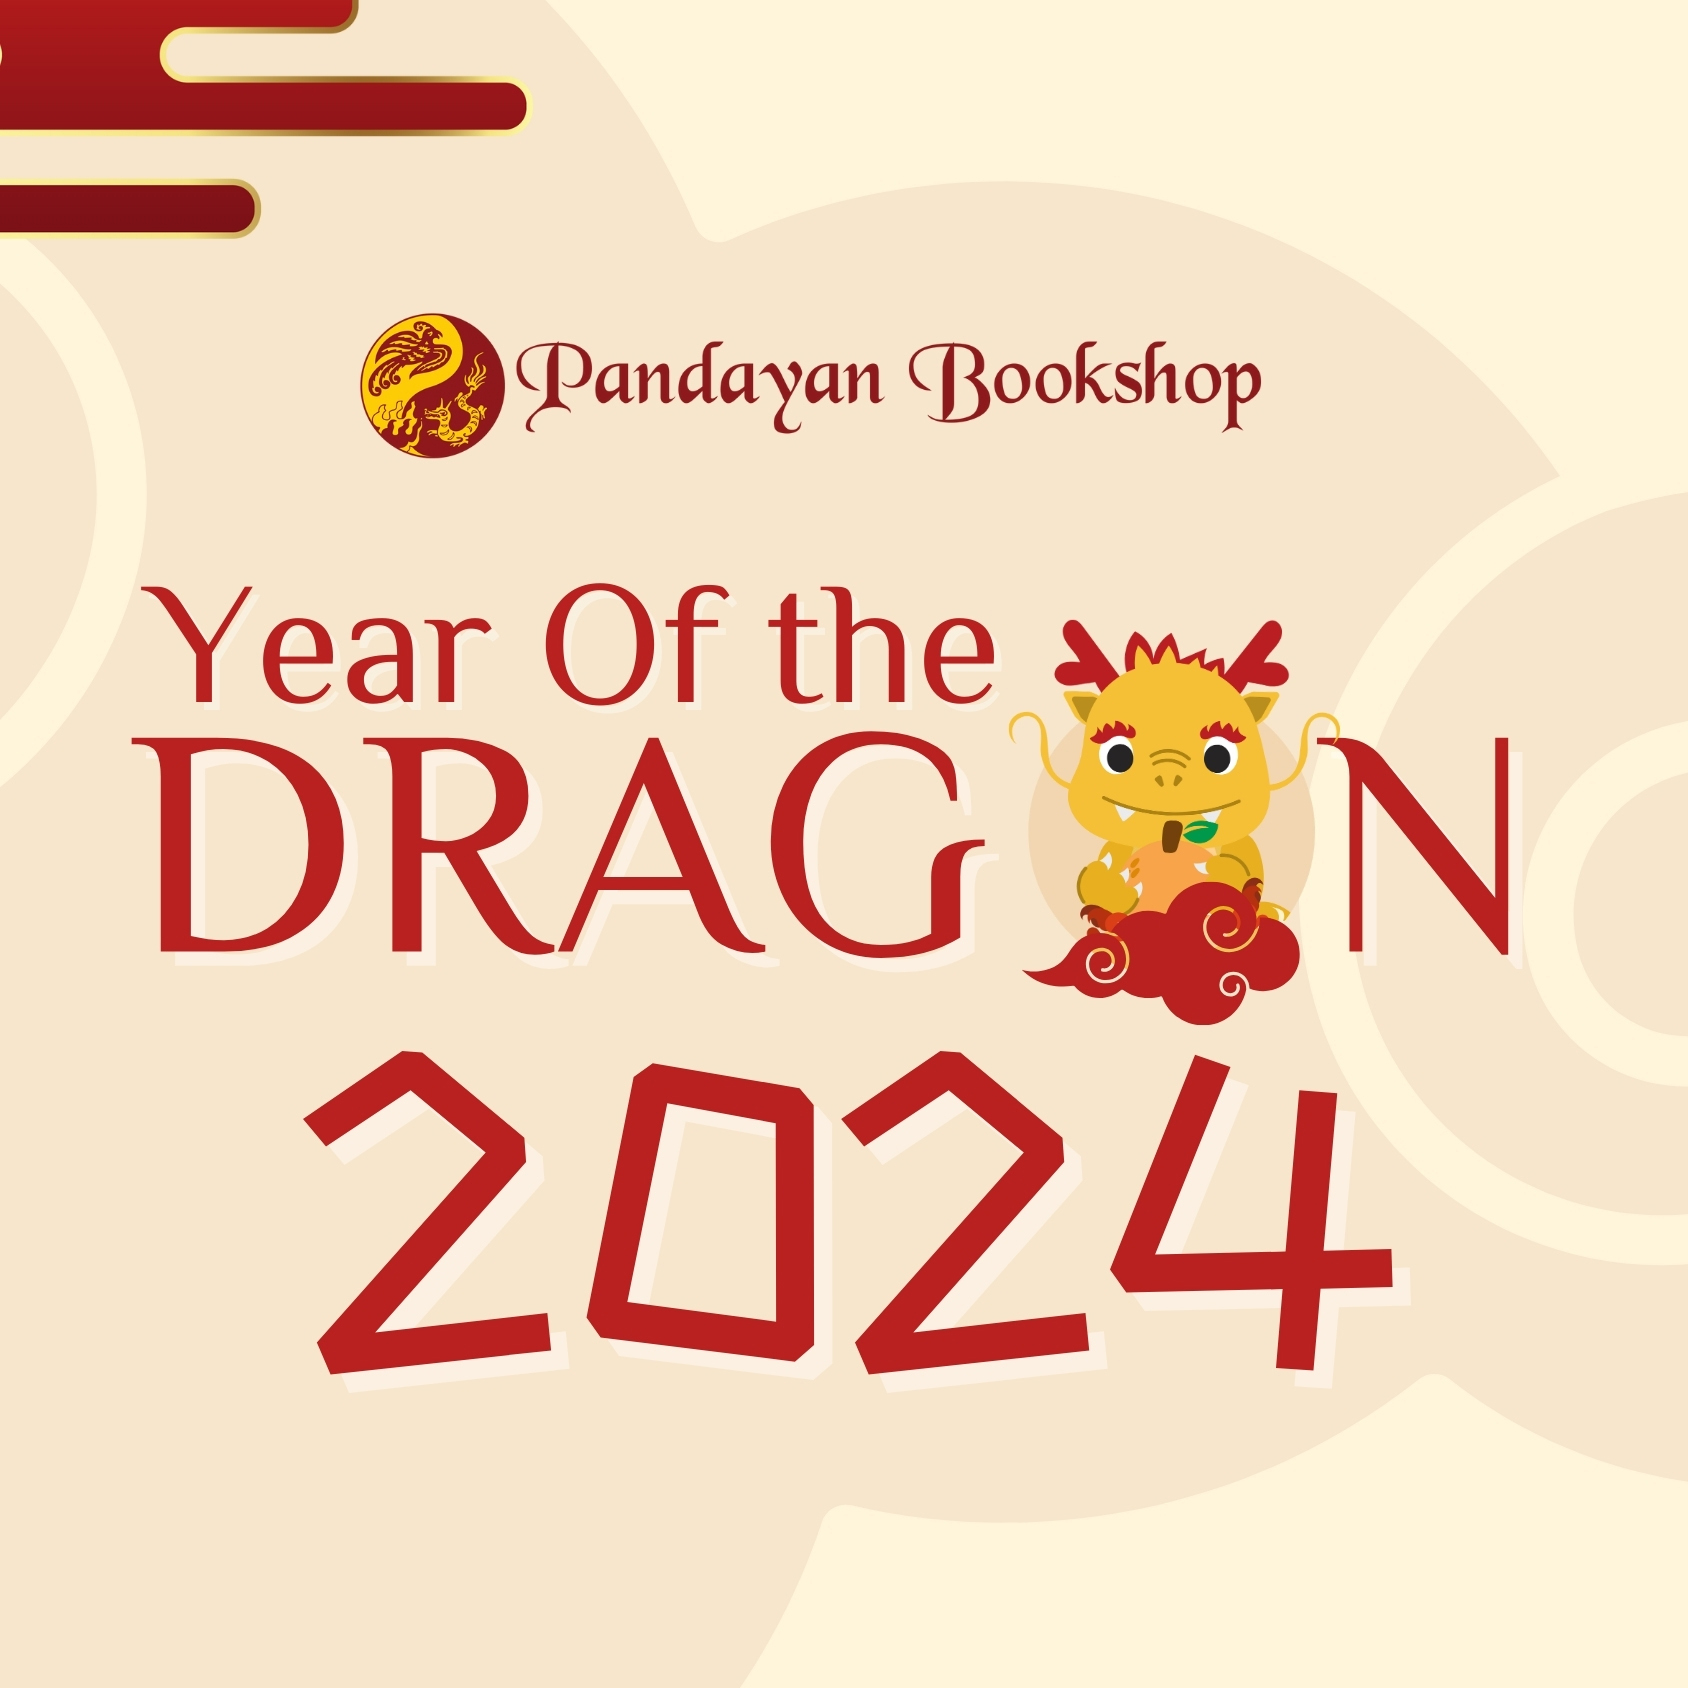 Chinese New Year 2024: Year of the Dragon